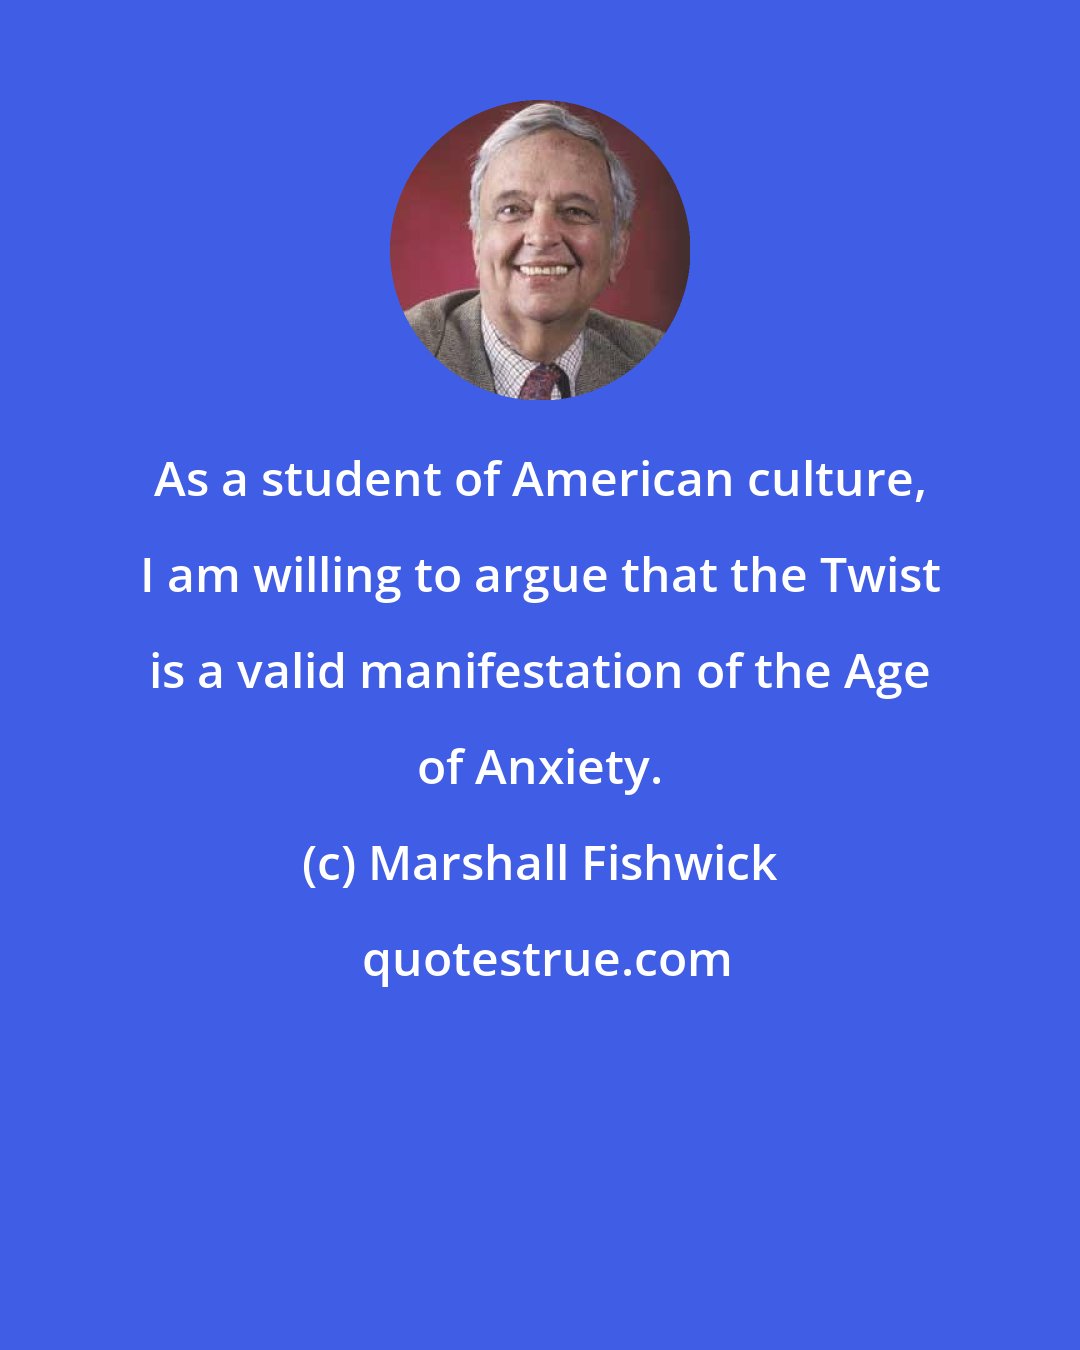 Marshall Fishwick: As a student of American culture, I am willing to argue that the Twist is a valid manifestation of the Age of Anxiety.